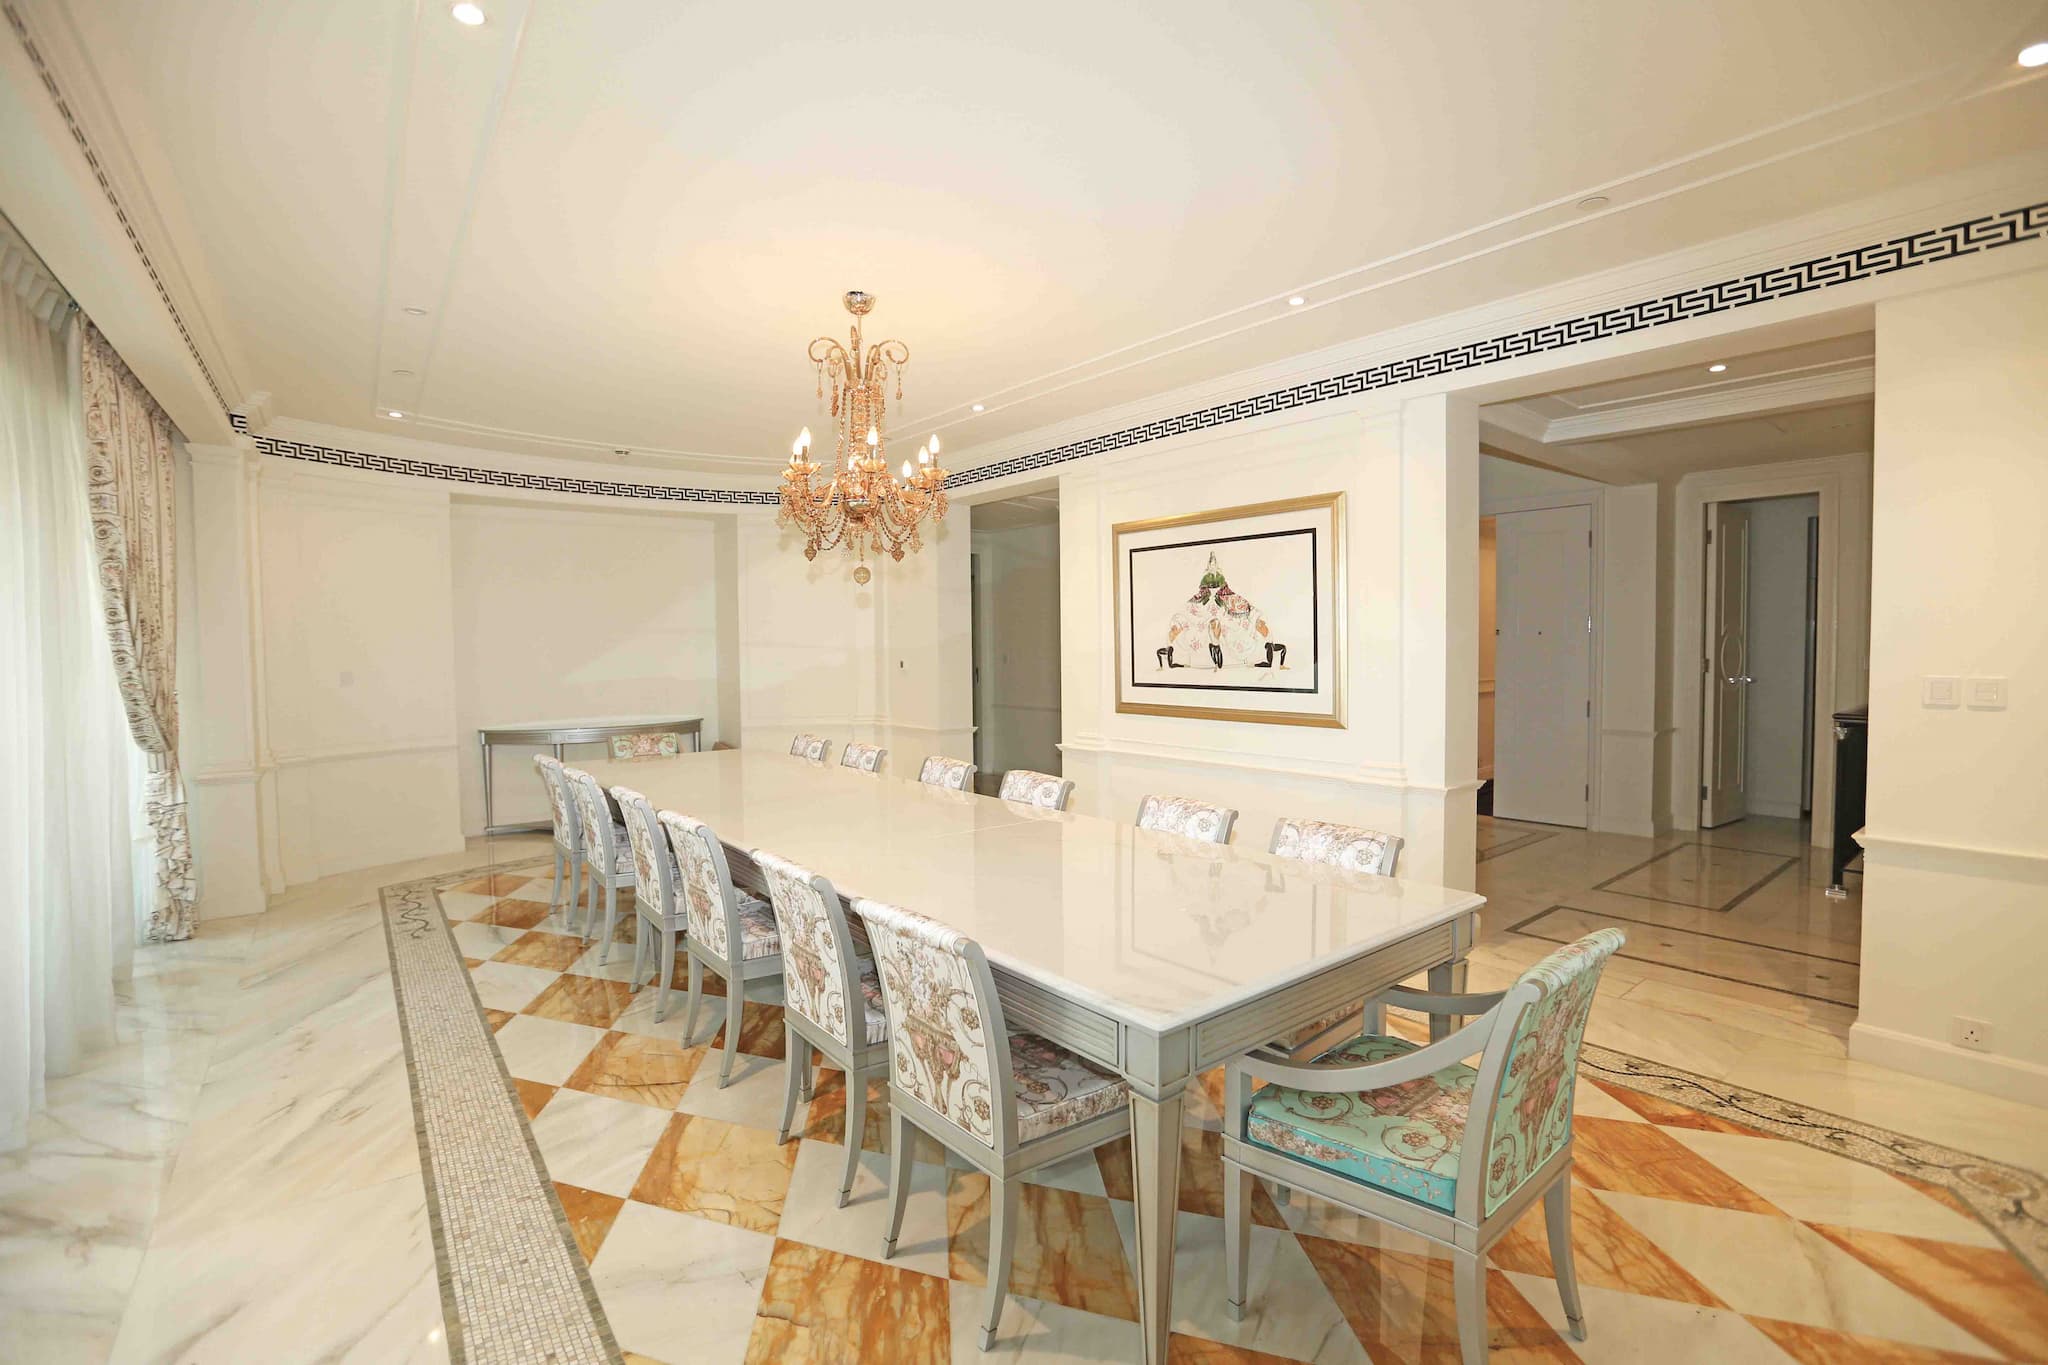 3 Bedroom Serviced Residences For Sale Palazzo Versace Lp0347 1a0dd29393b05500.jpg